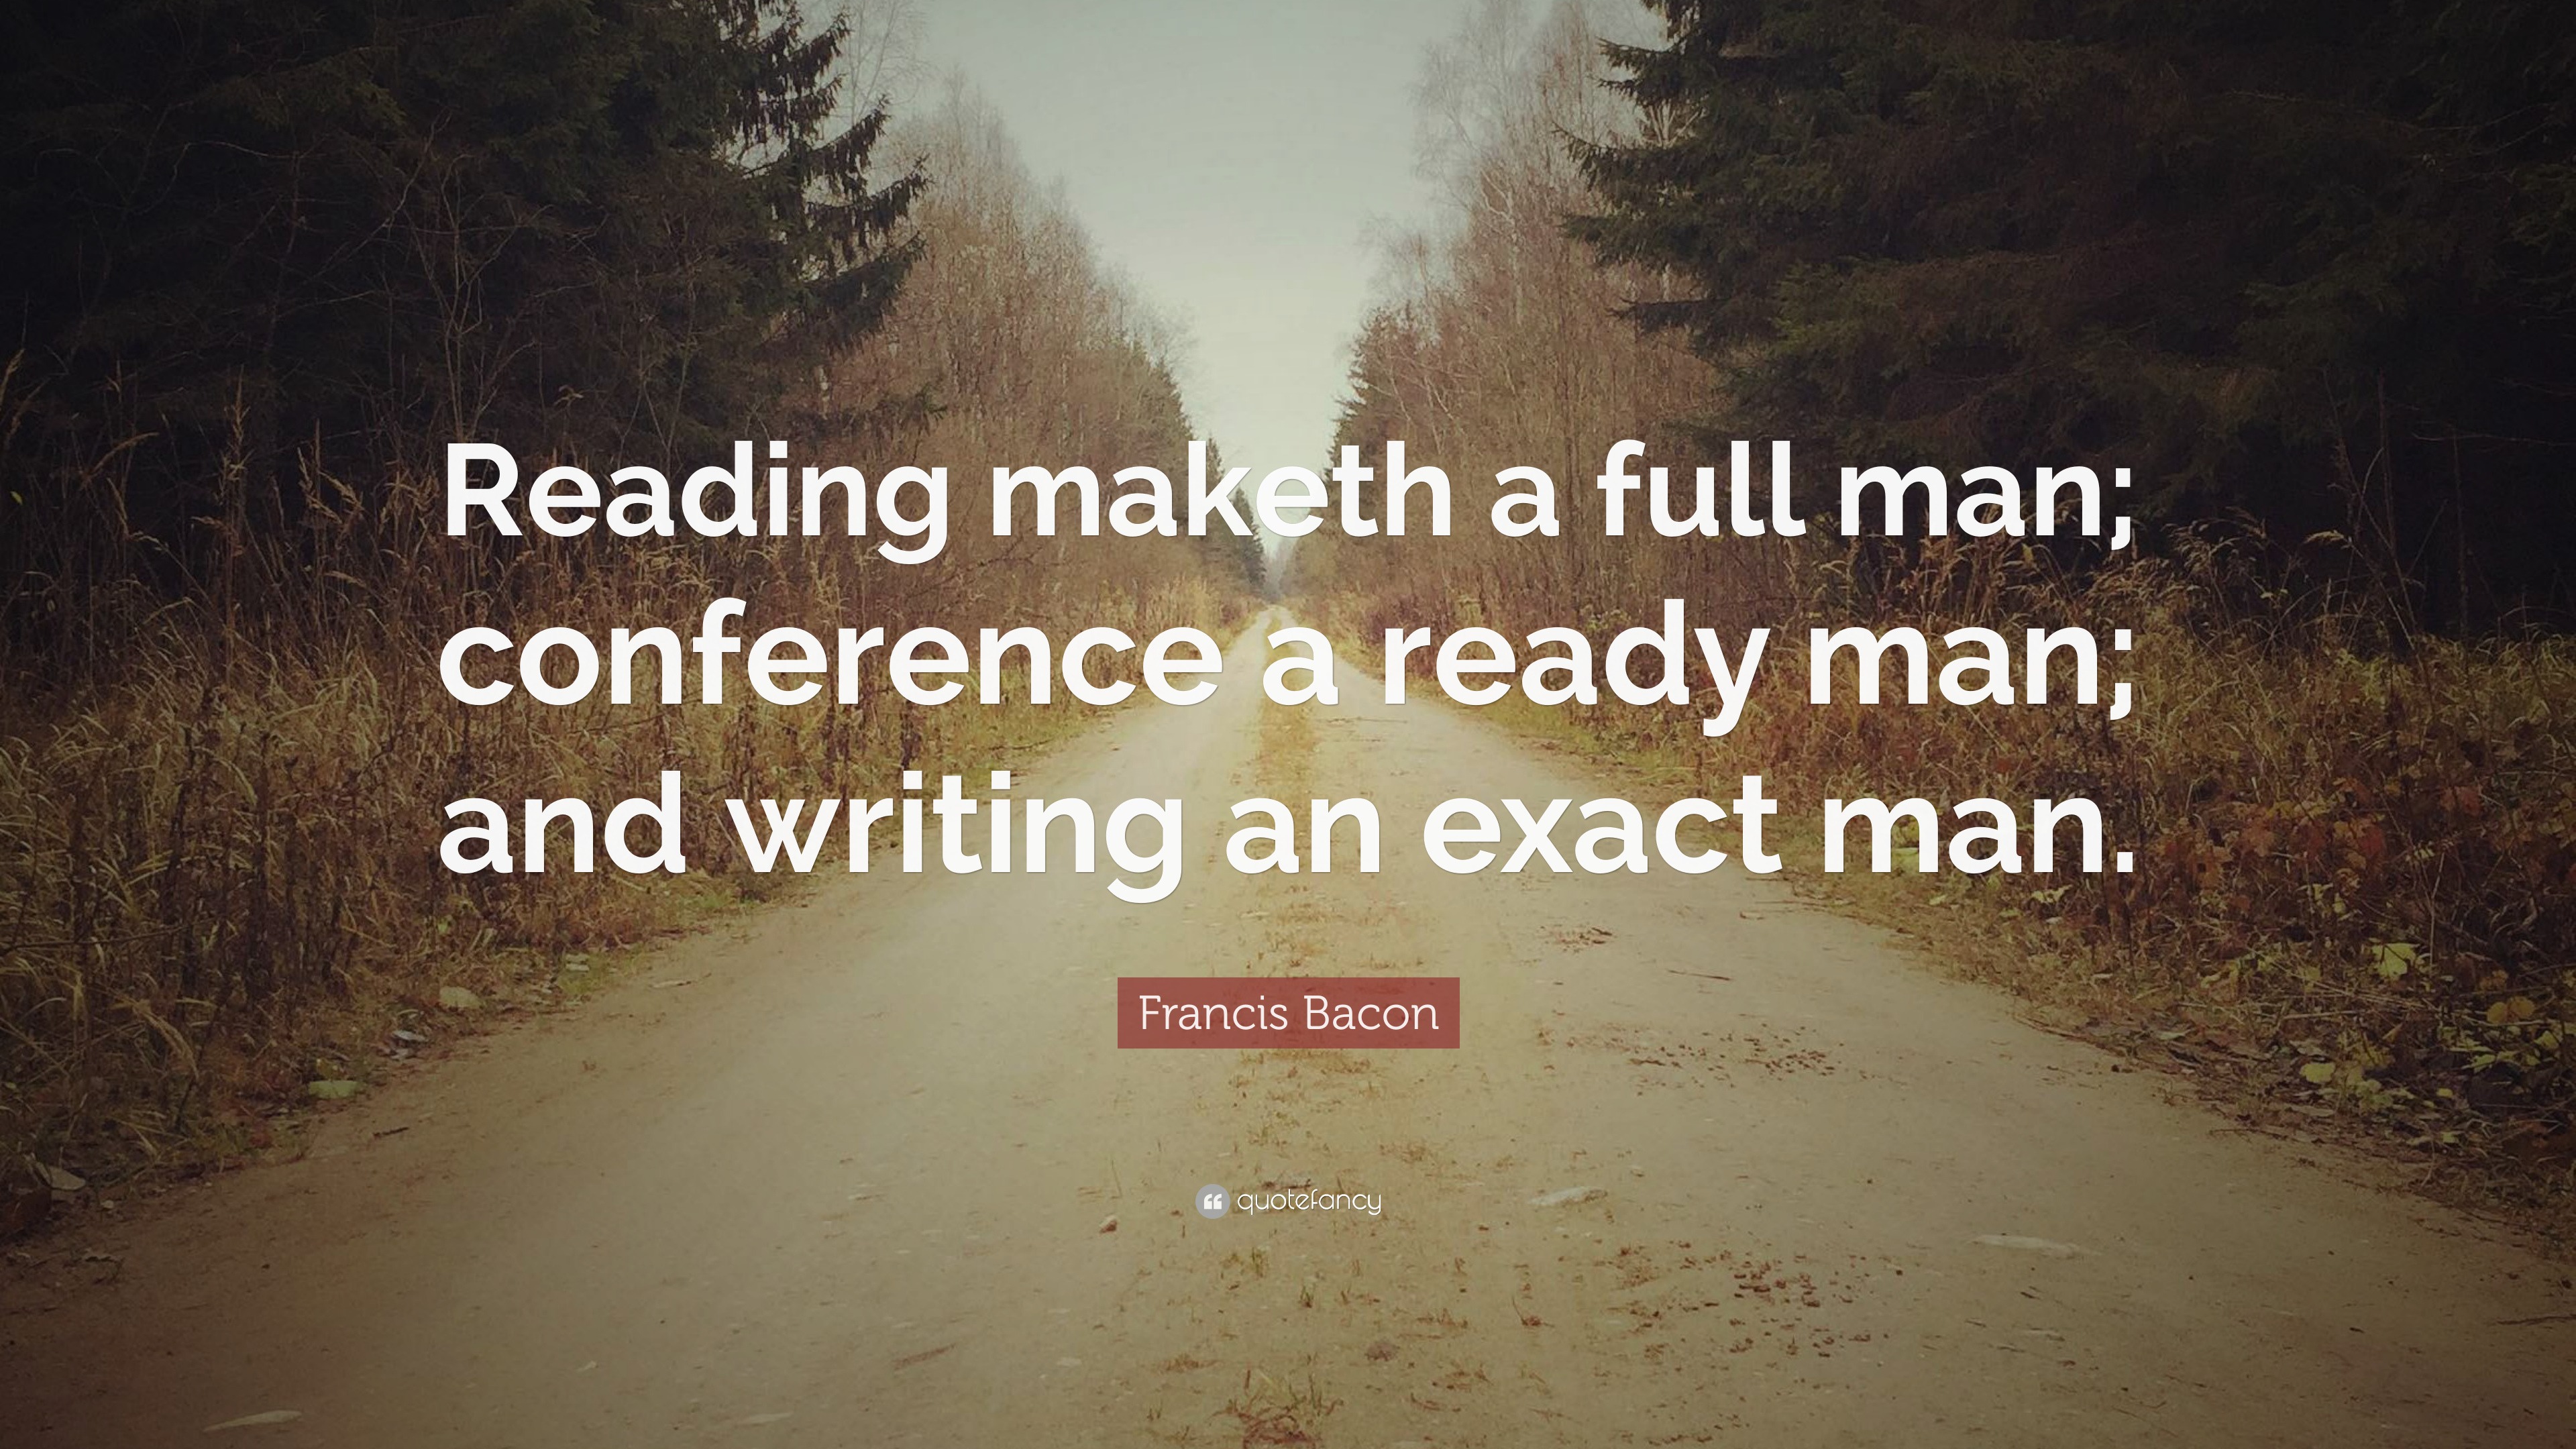 Francis Bacon Quote: “Reading maketh a full man; conference a ready man